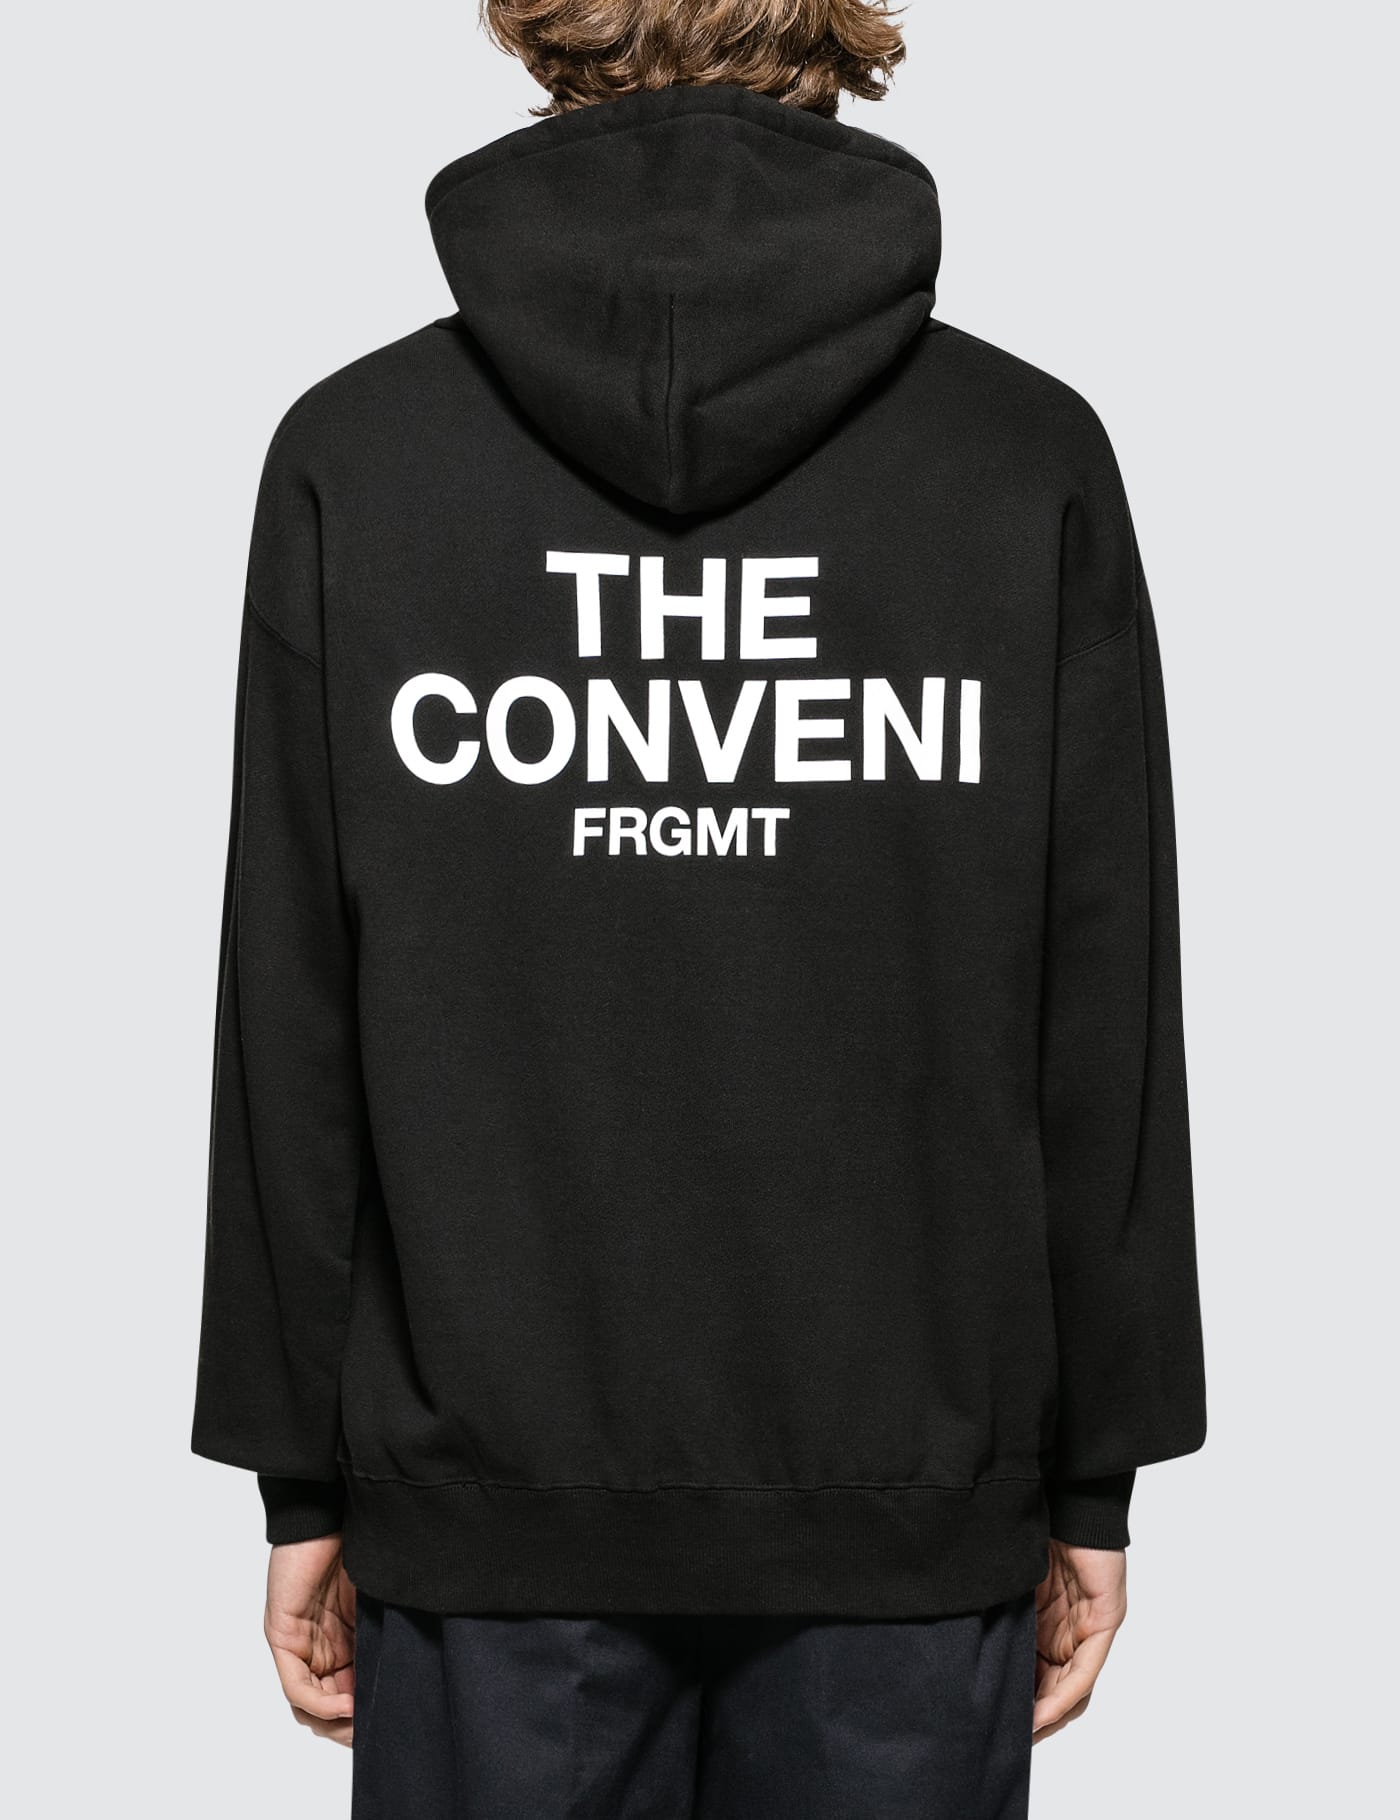 The Conveni - FRGMT x The Conveni Hoodie | HBX - Globally Curated Fashion  and Lifestyle by Hypebeast